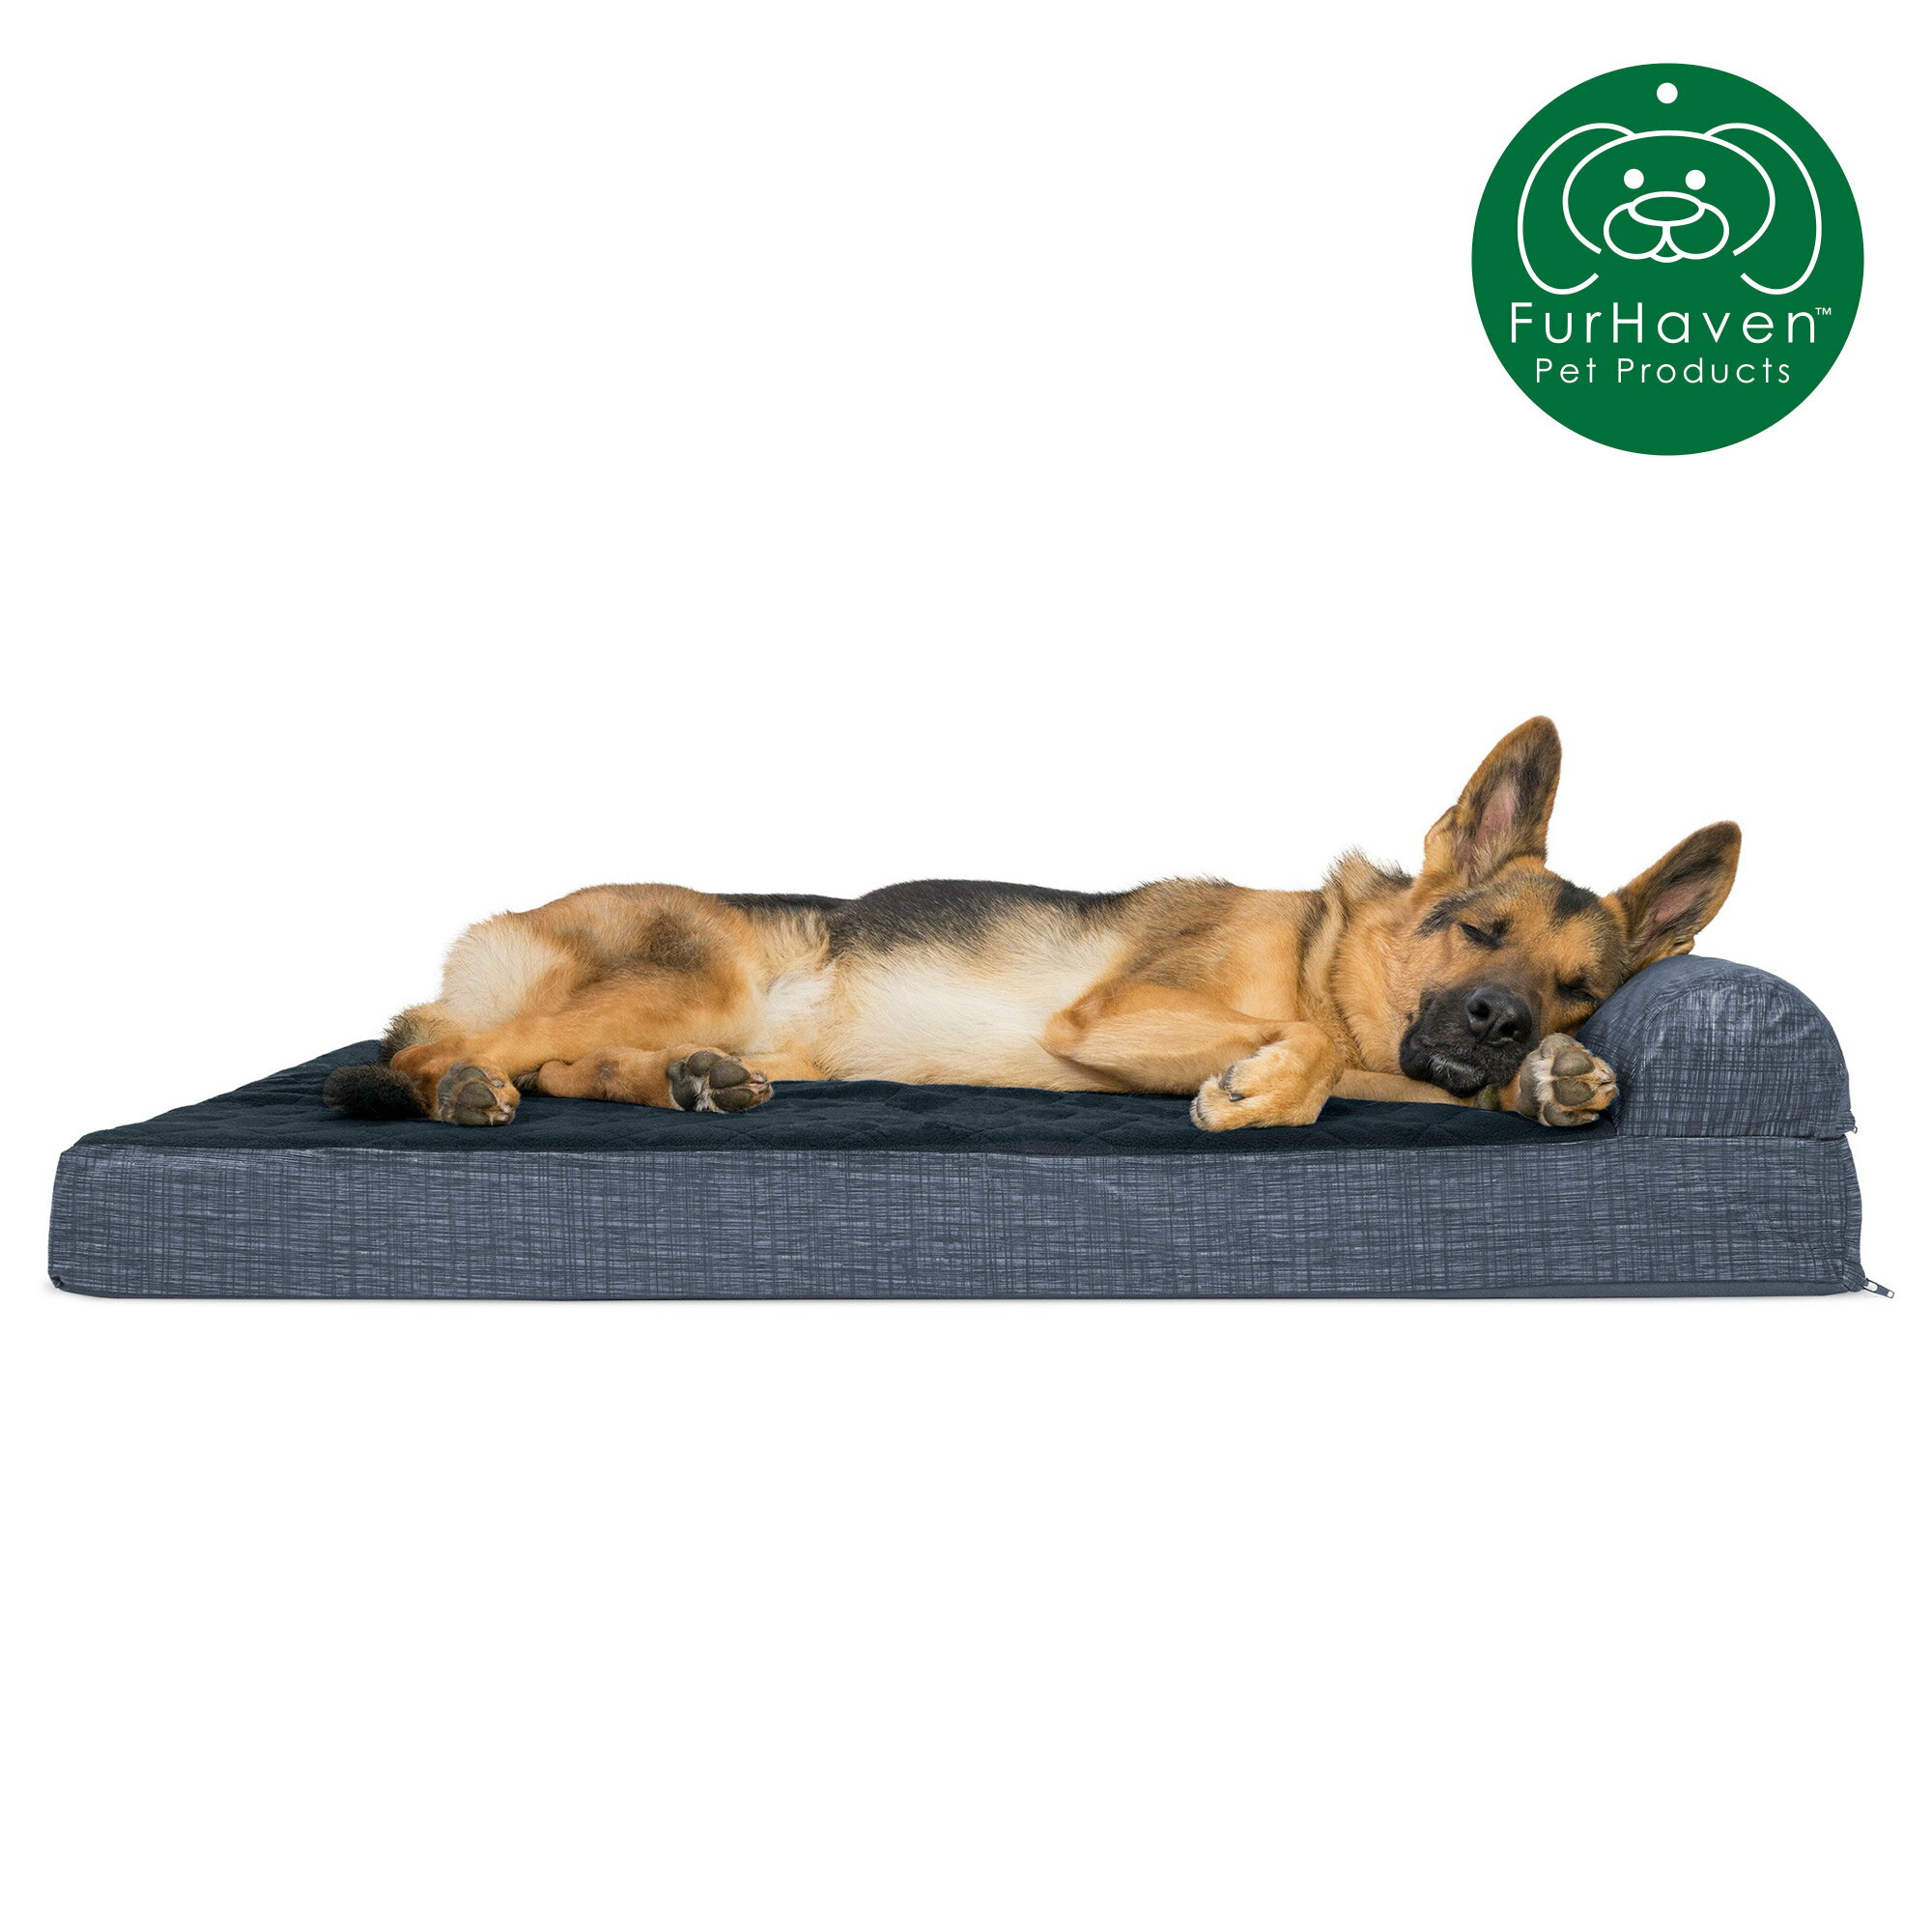 chaise lounge pet cover